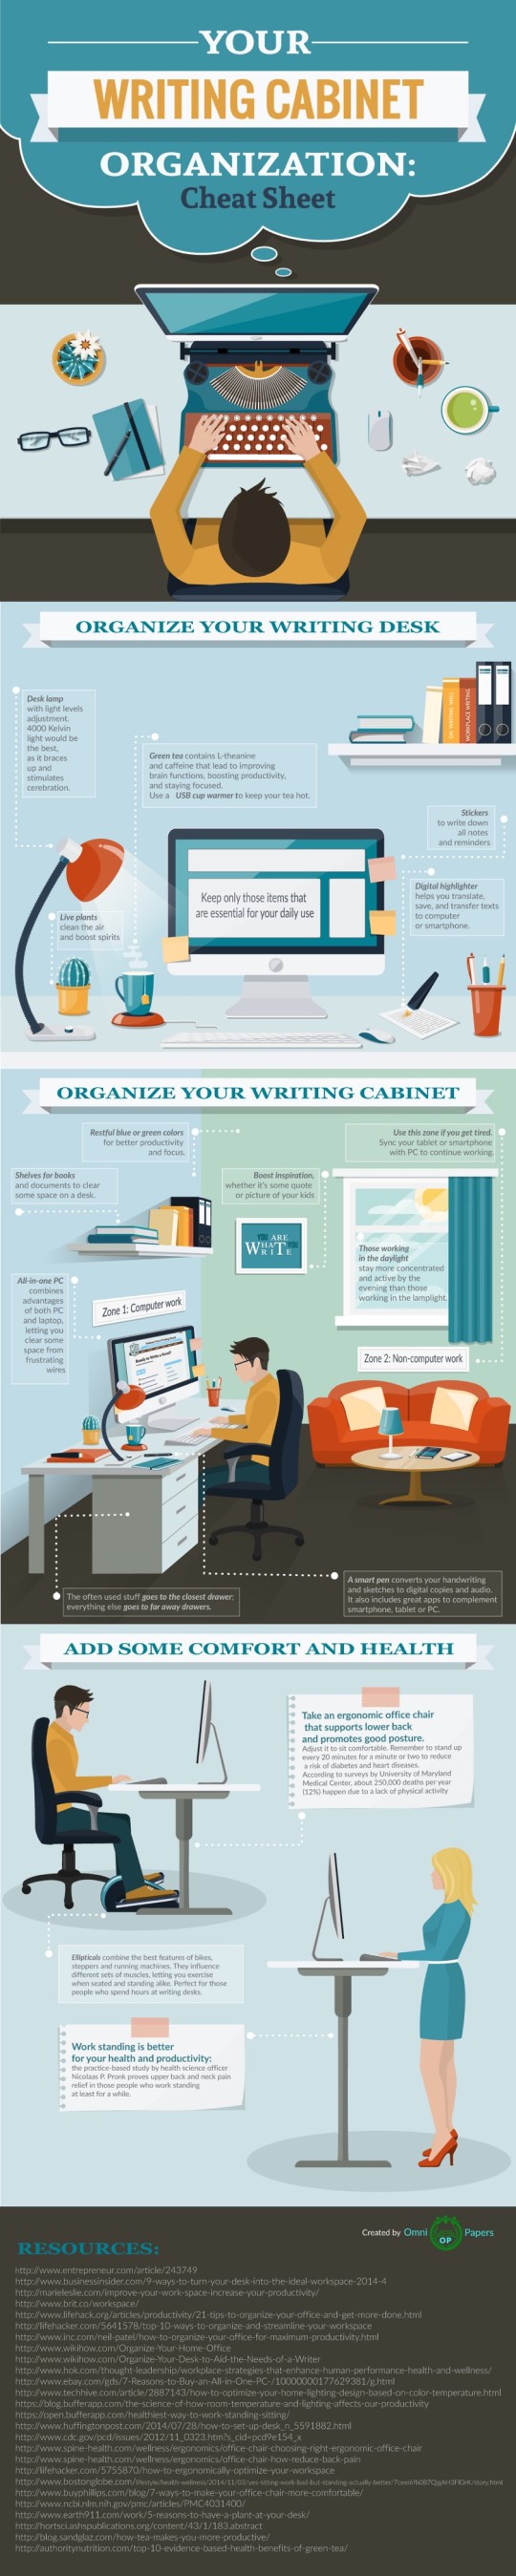 Tips to organize a writing desk #infographic